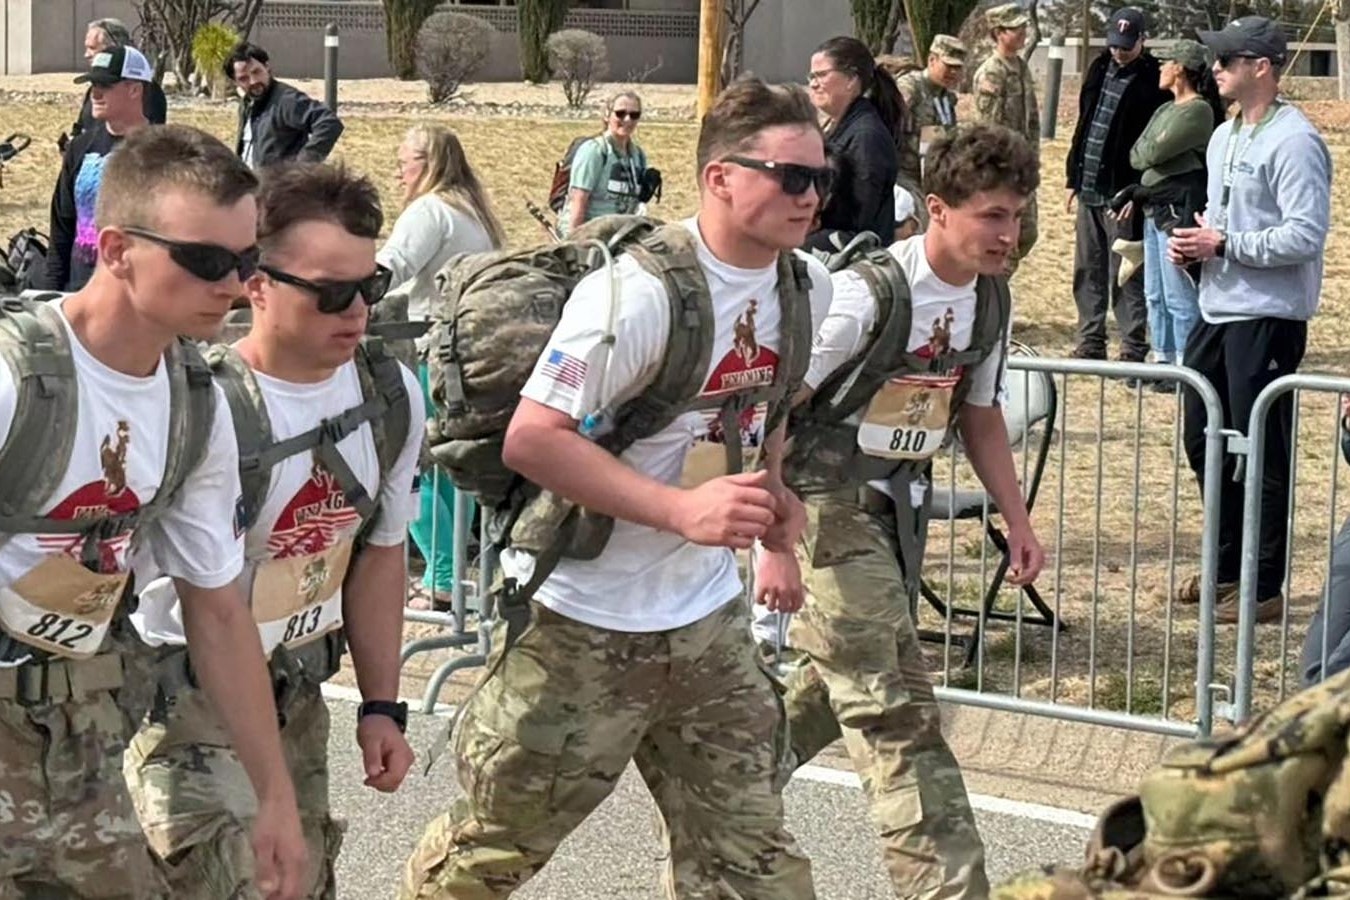 Lugging 35-pound backpacks over the course of a full marathon, UW ROTC cadets Justin Stiles, from left, Louis Torres, Ryan Engle and Jack Harrington finished in 16th place at the Bataan Memorial Death March competition.